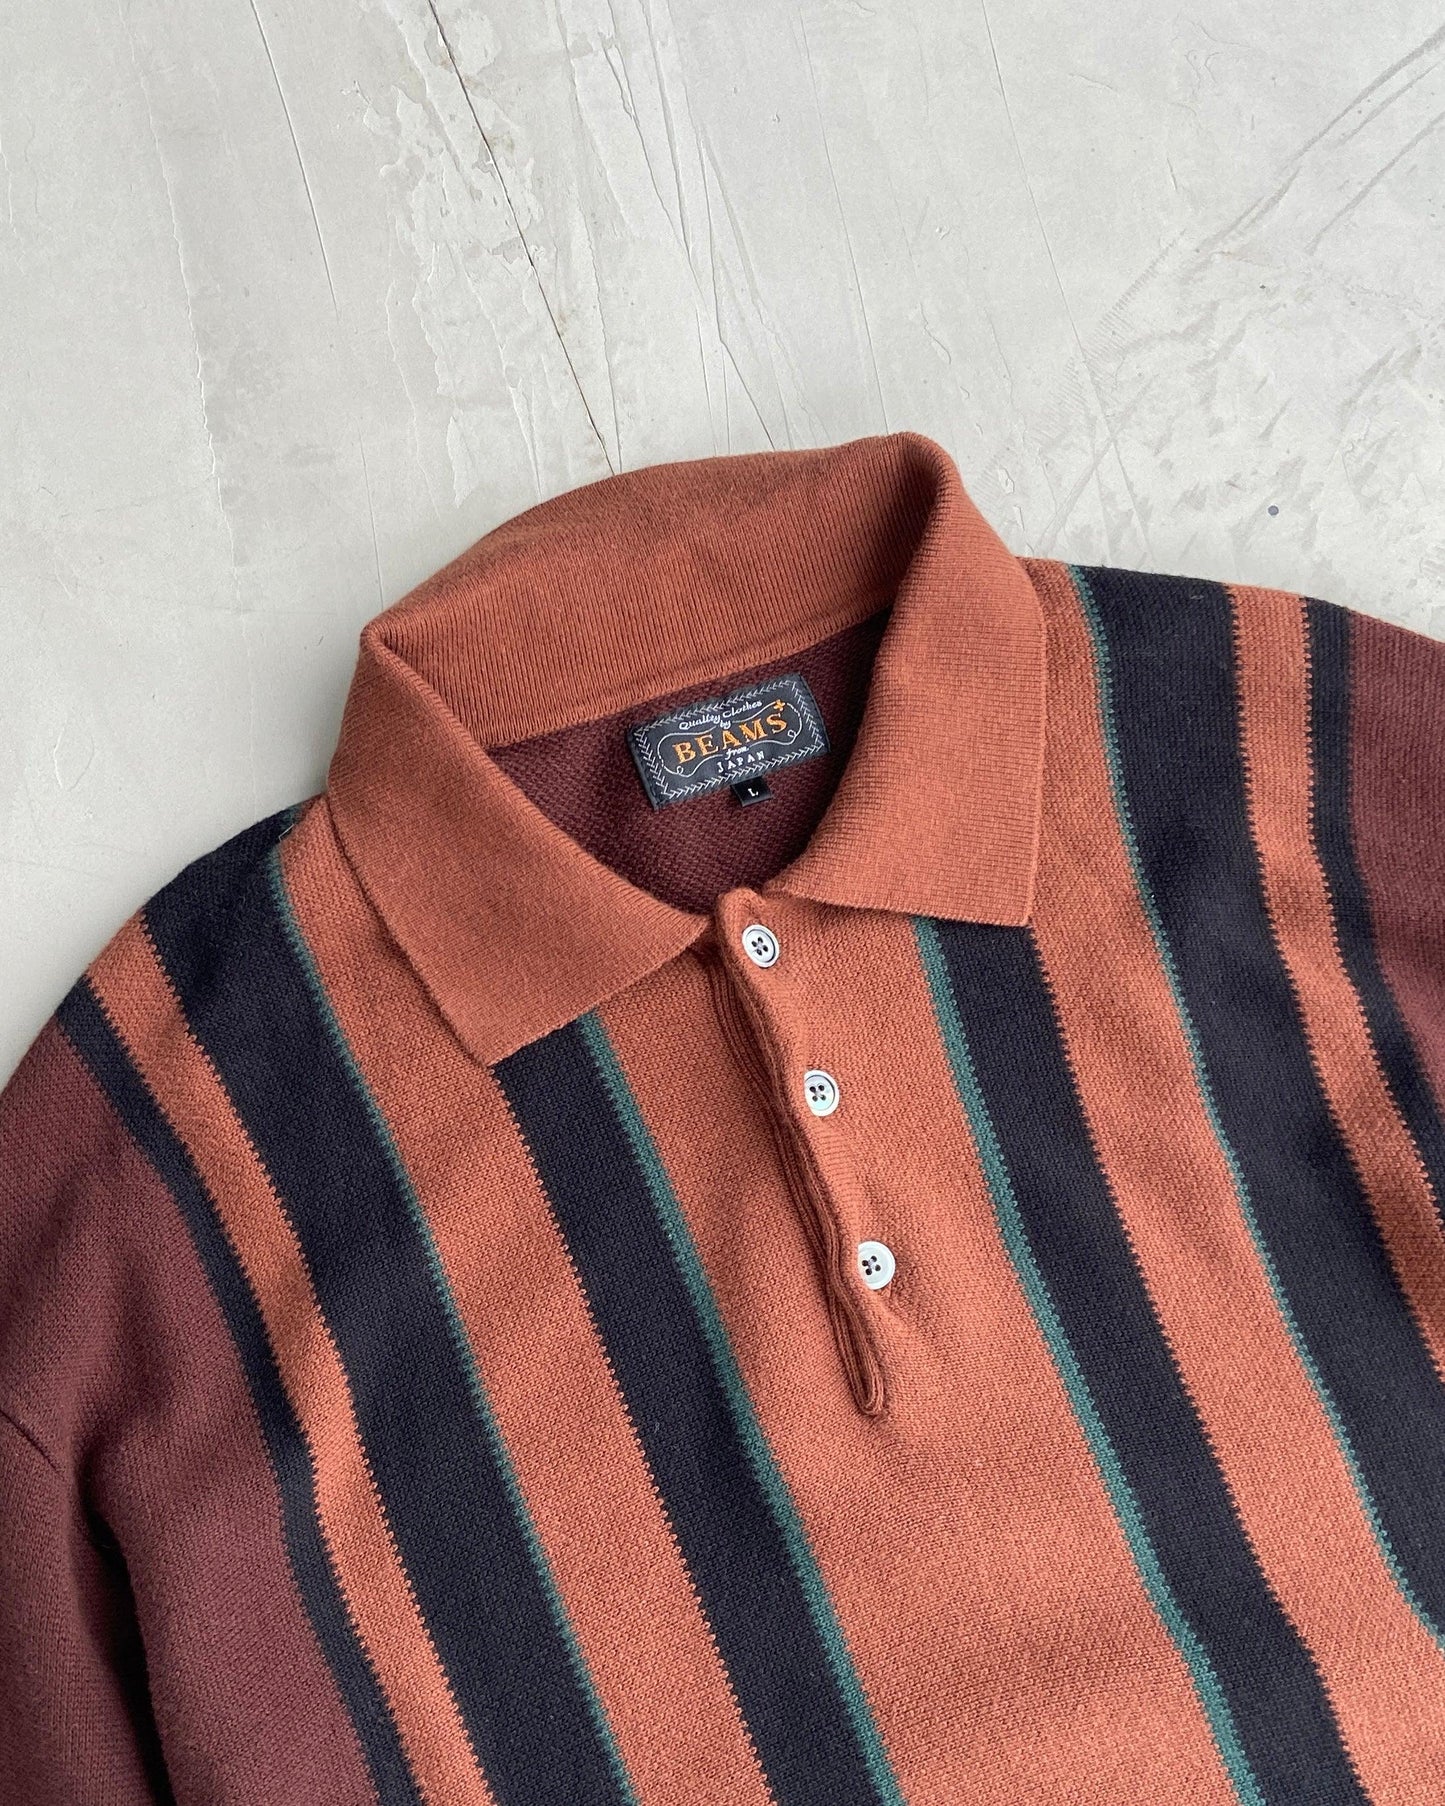 BEAMS JAPAN STRIPED LONG SLEEVE POLO TOP - L - Known Source